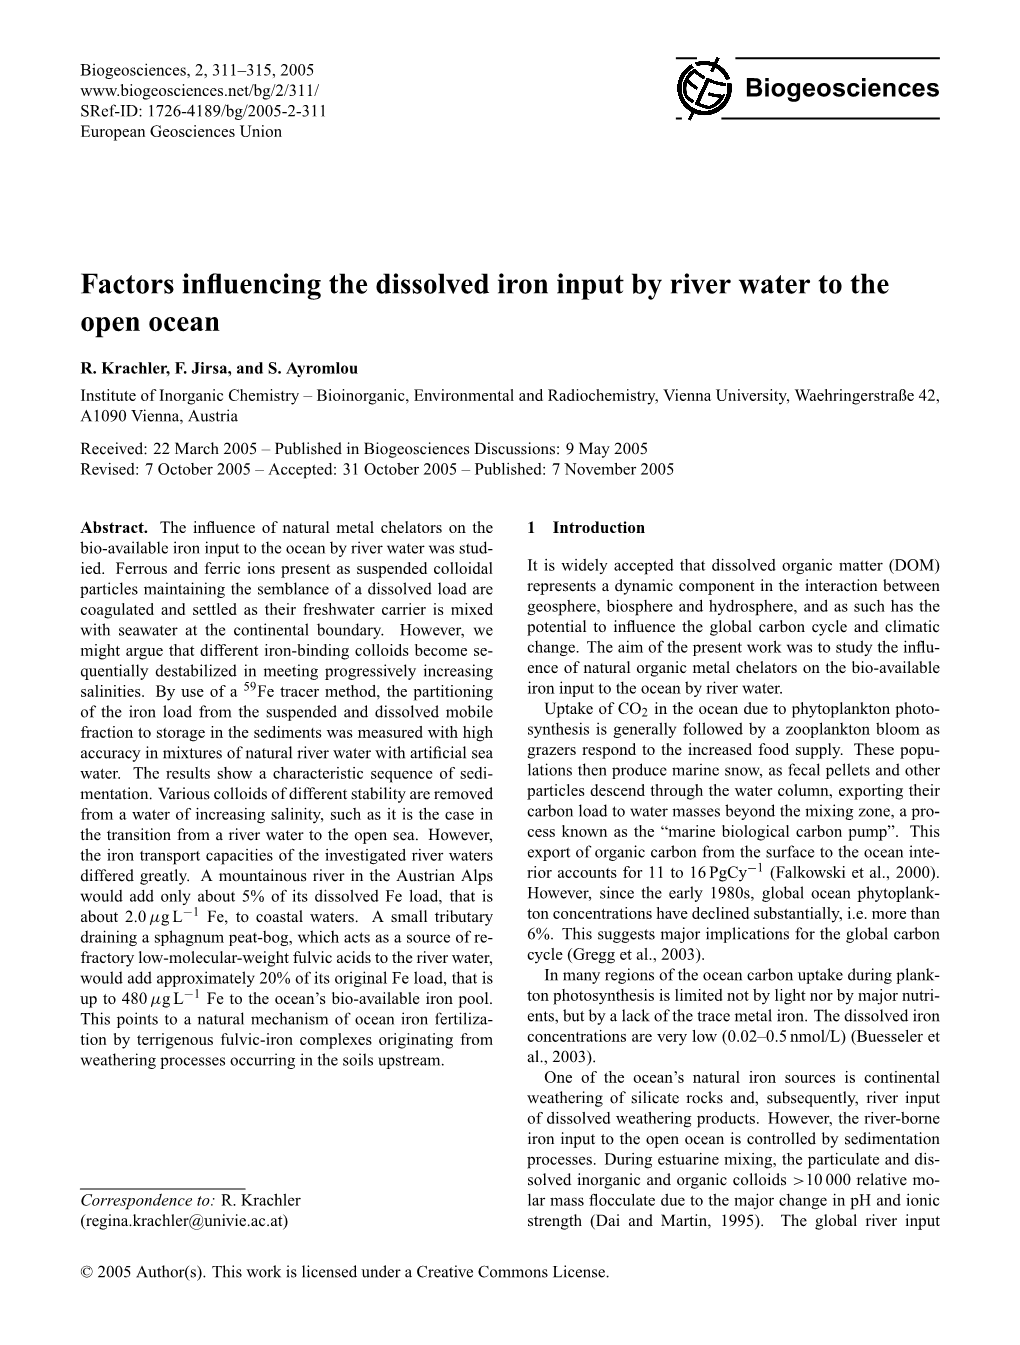 Factors Influencing the Dissolved Iron Input by River Water to the Open Ocean